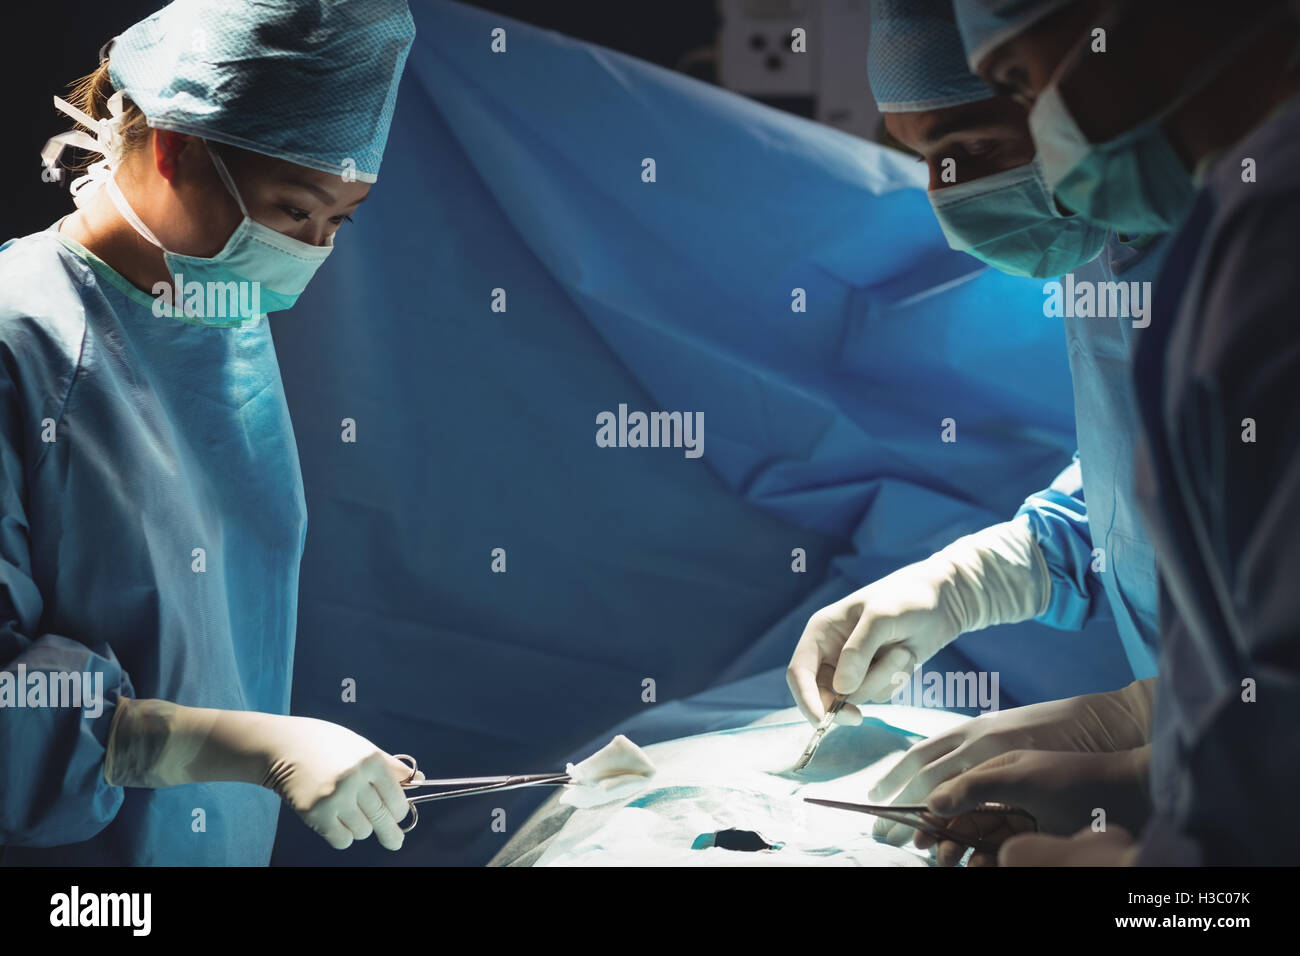 Surgeons performing operation in operation room Stock Photo